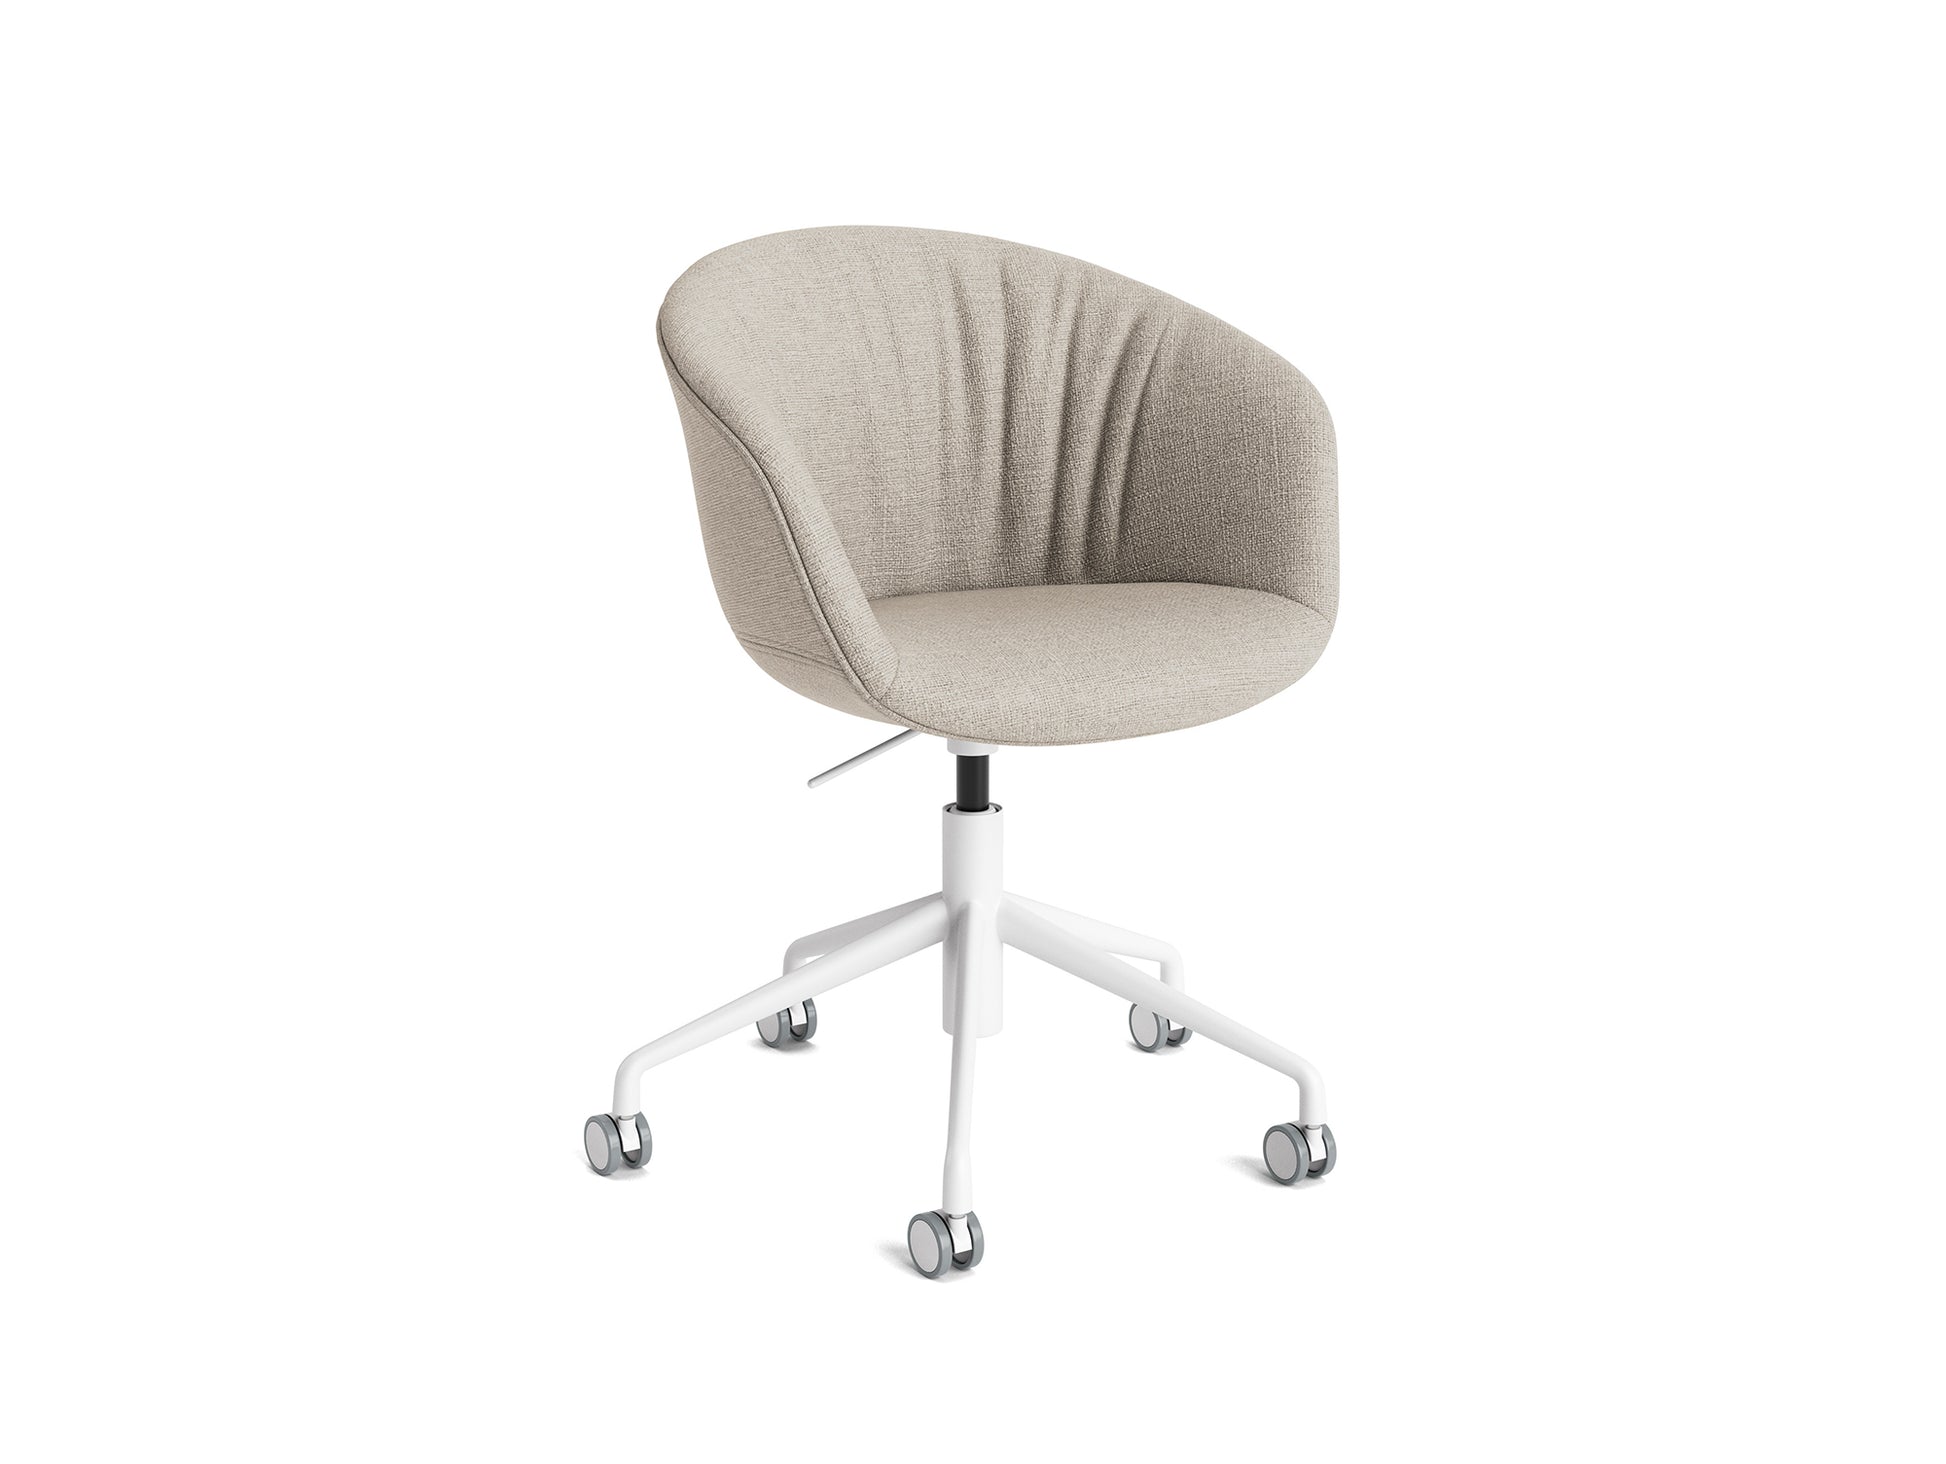 About A Chair AAC 53 Soft by HAY - Roden 04 / White Powder Coated Aluminium